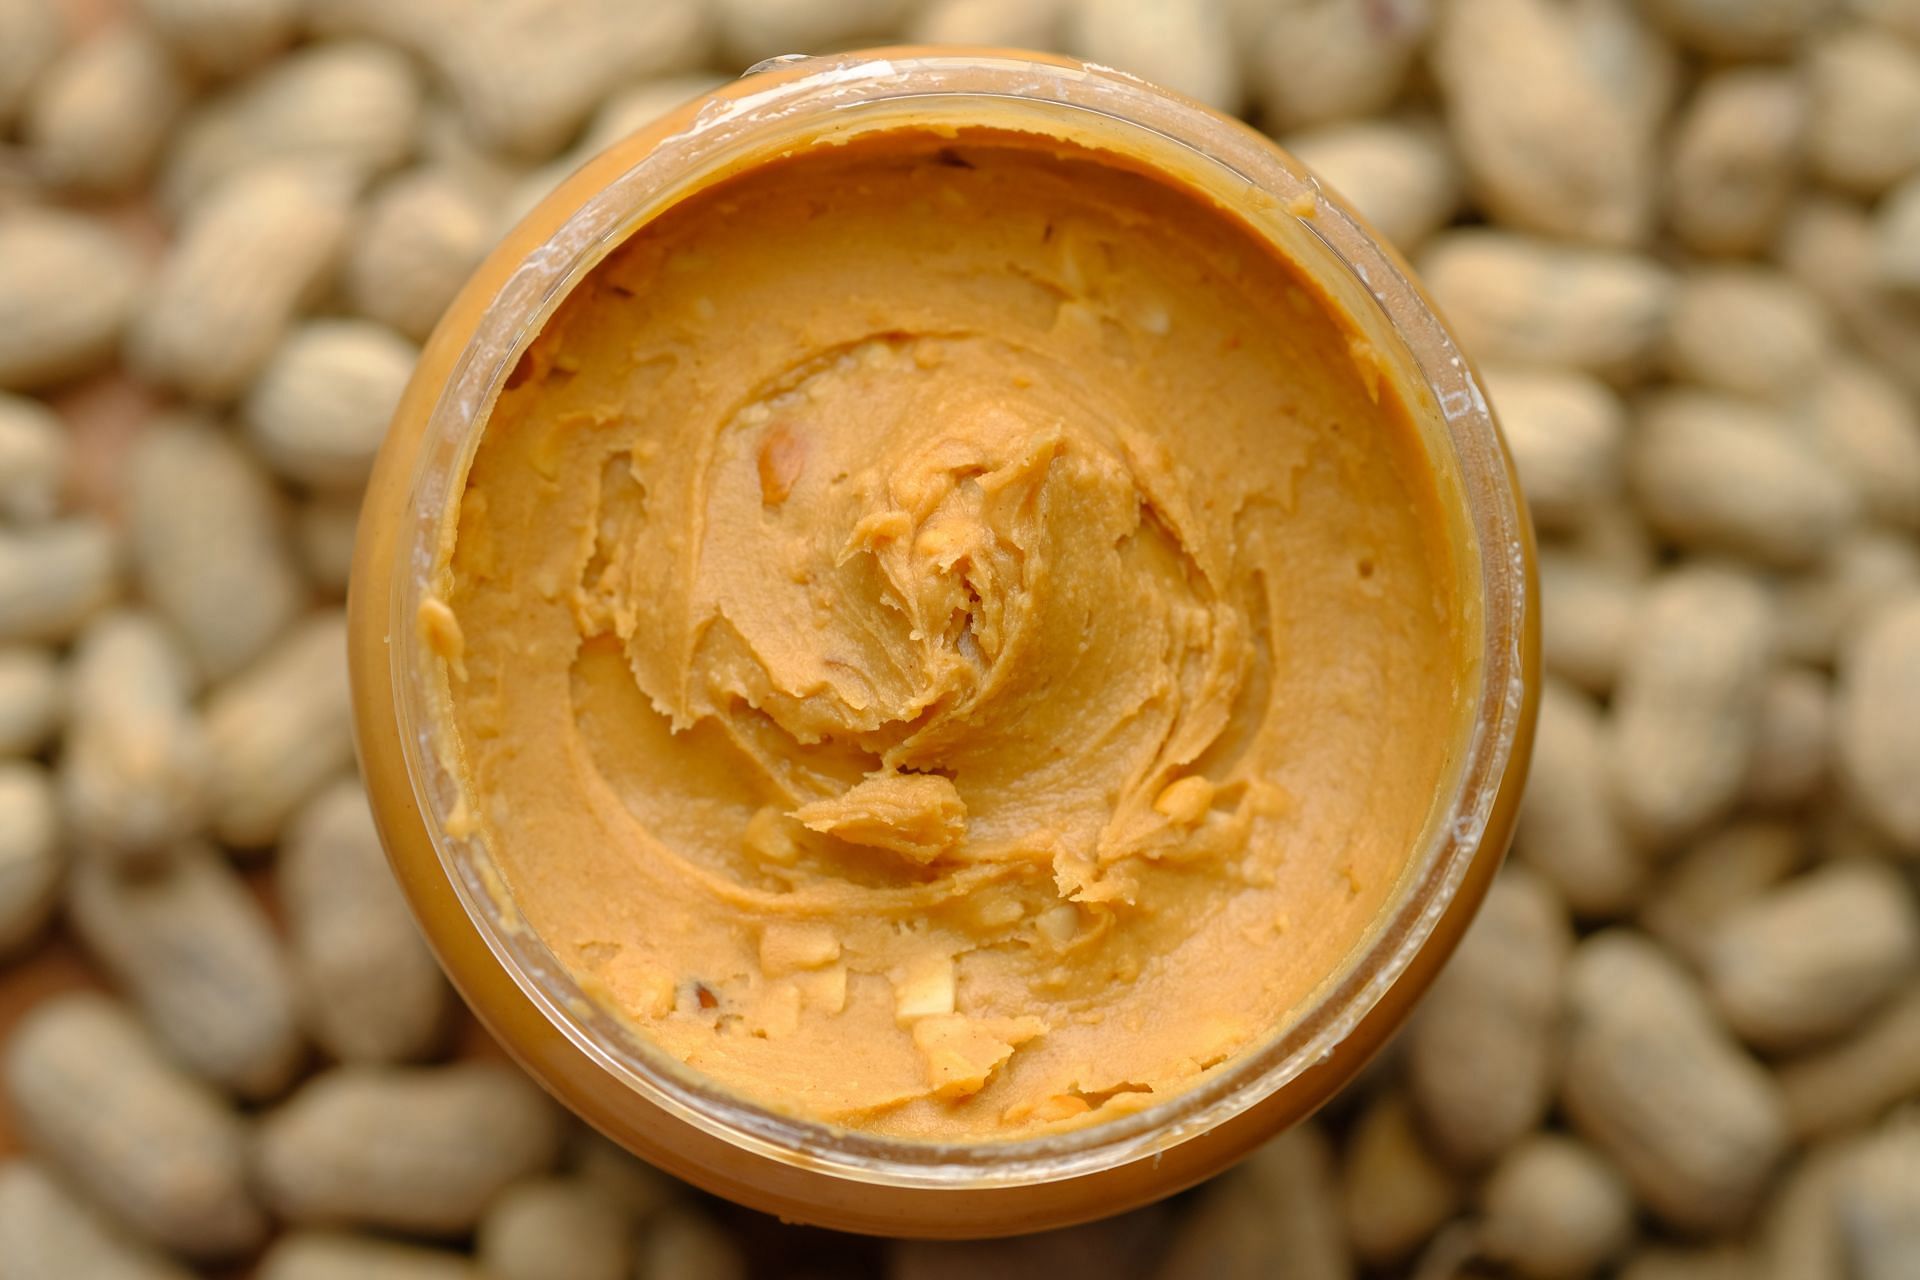 Any type of nut butters have more healthy fats. (Image via Unsplash/Towfiqu Barbhuiya)